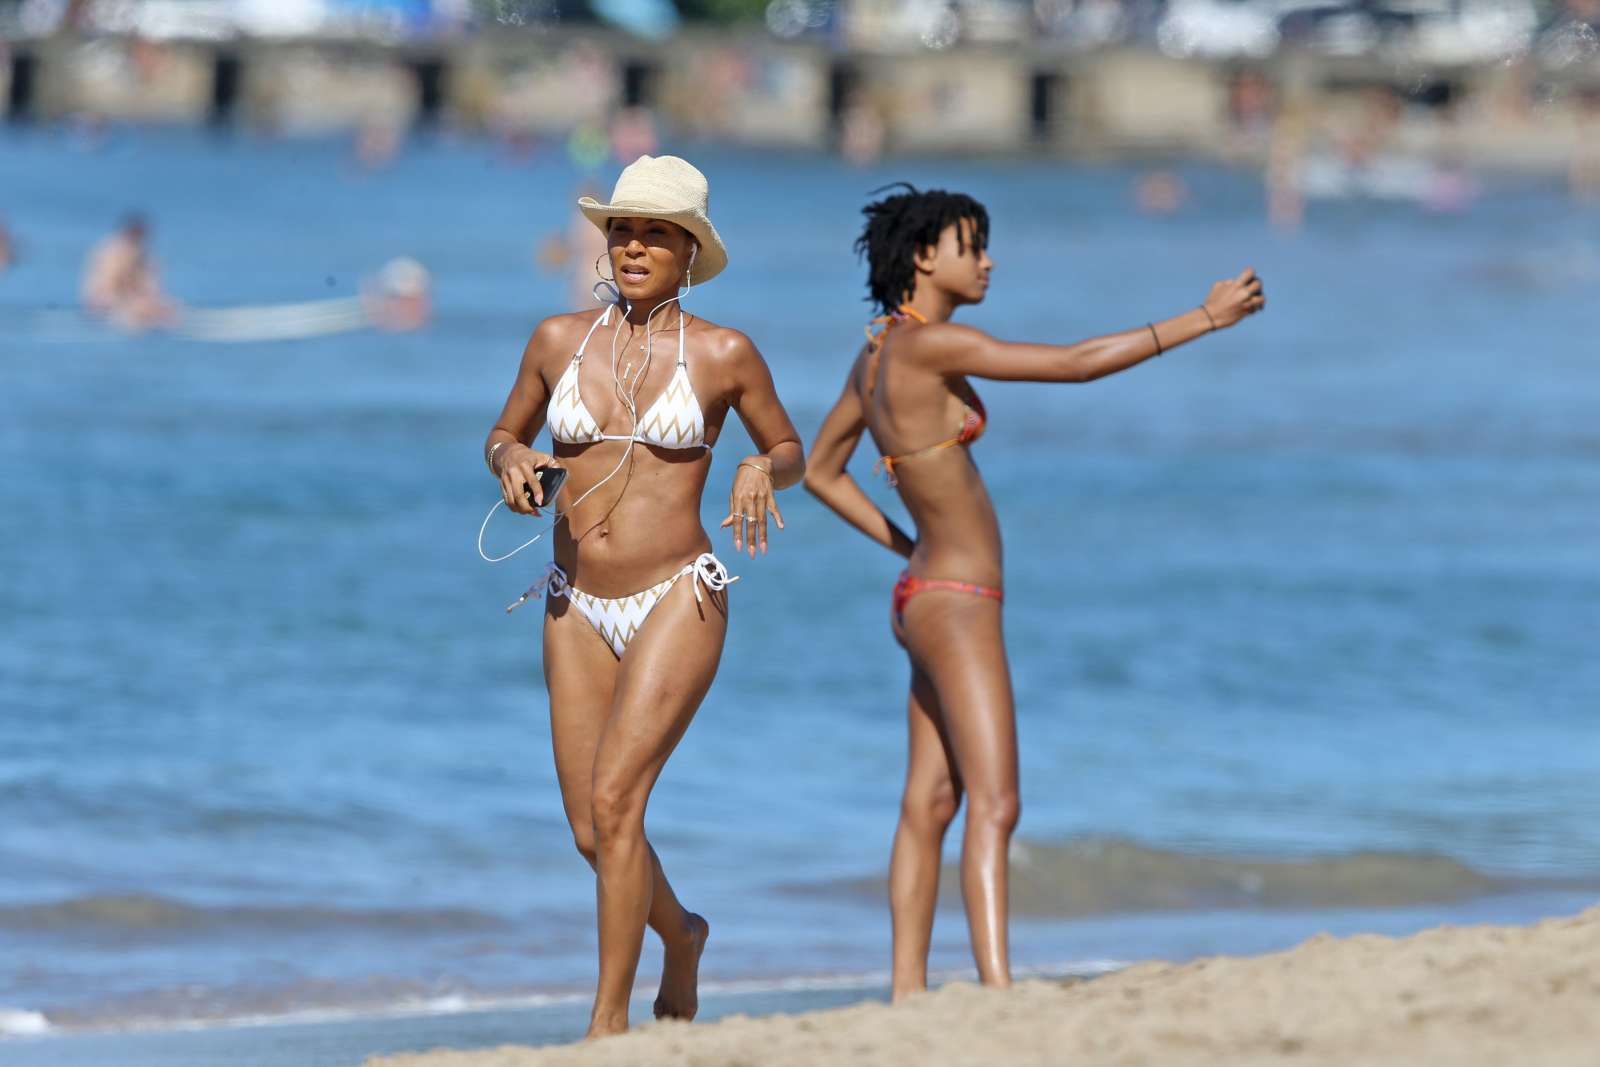 Willow smith swimsuit